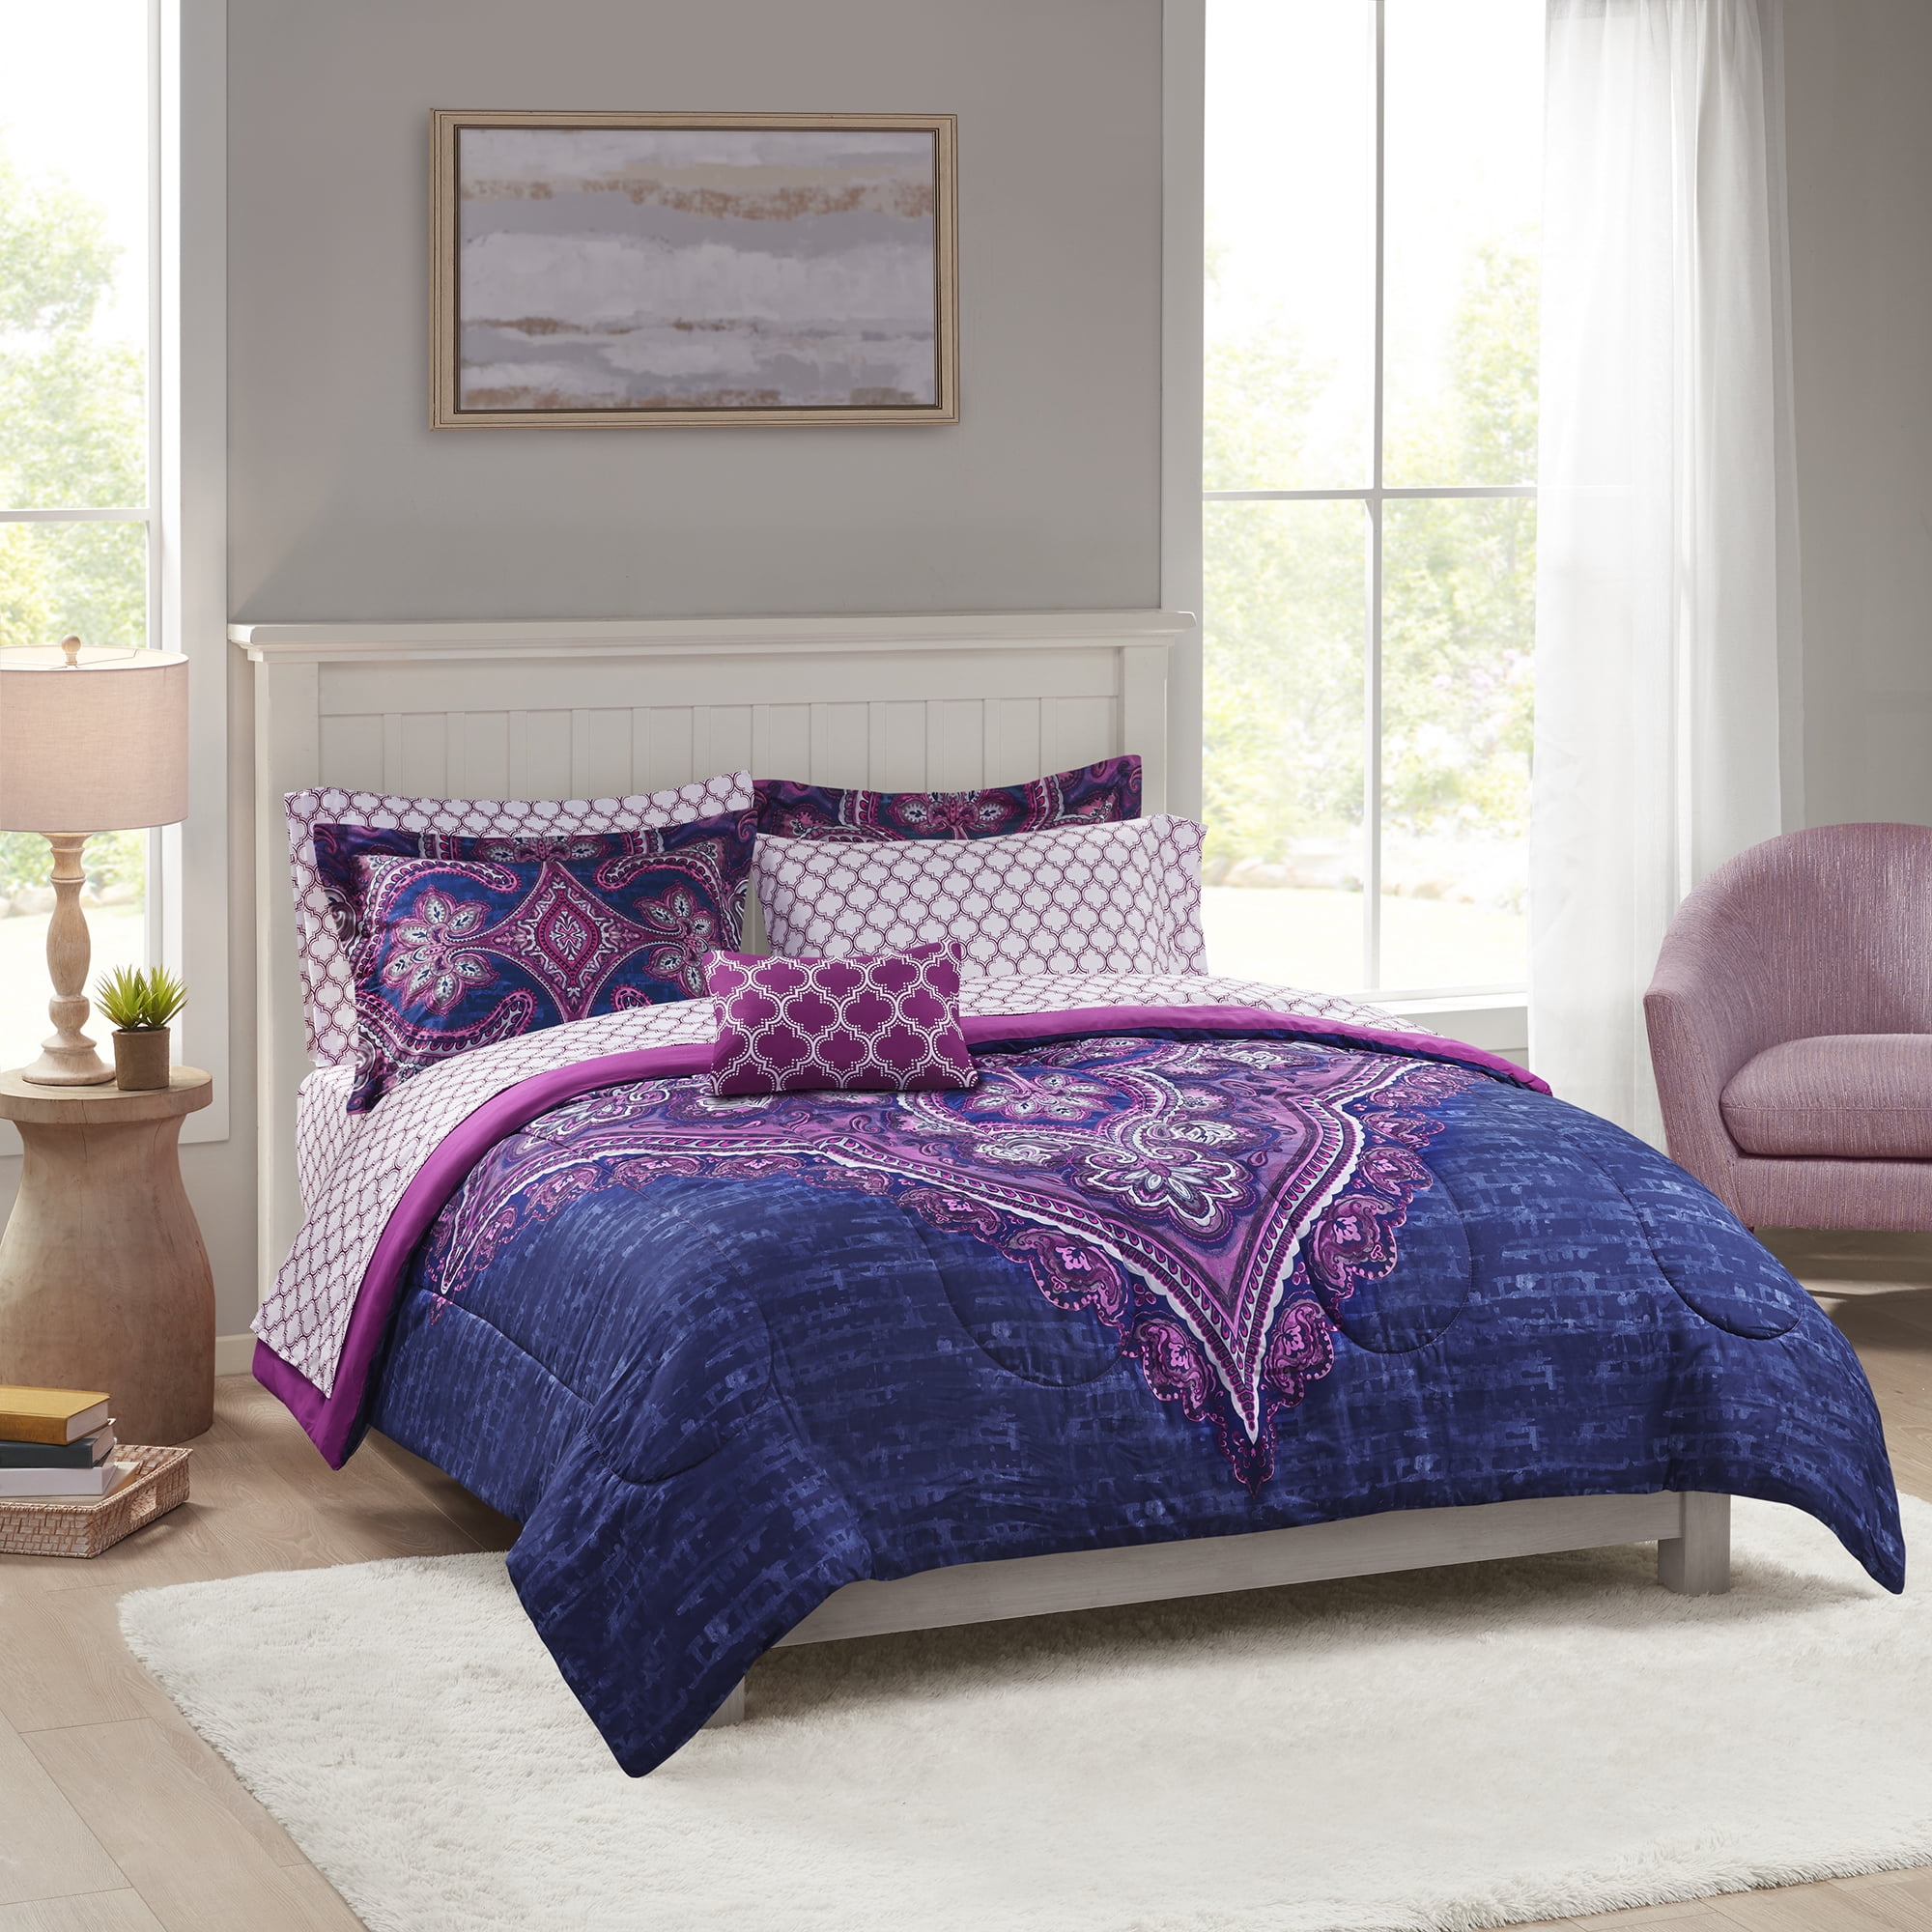 Mainstays Purple Medallion Bed In A Bag, Twin Xl Bed In A Bag Sets